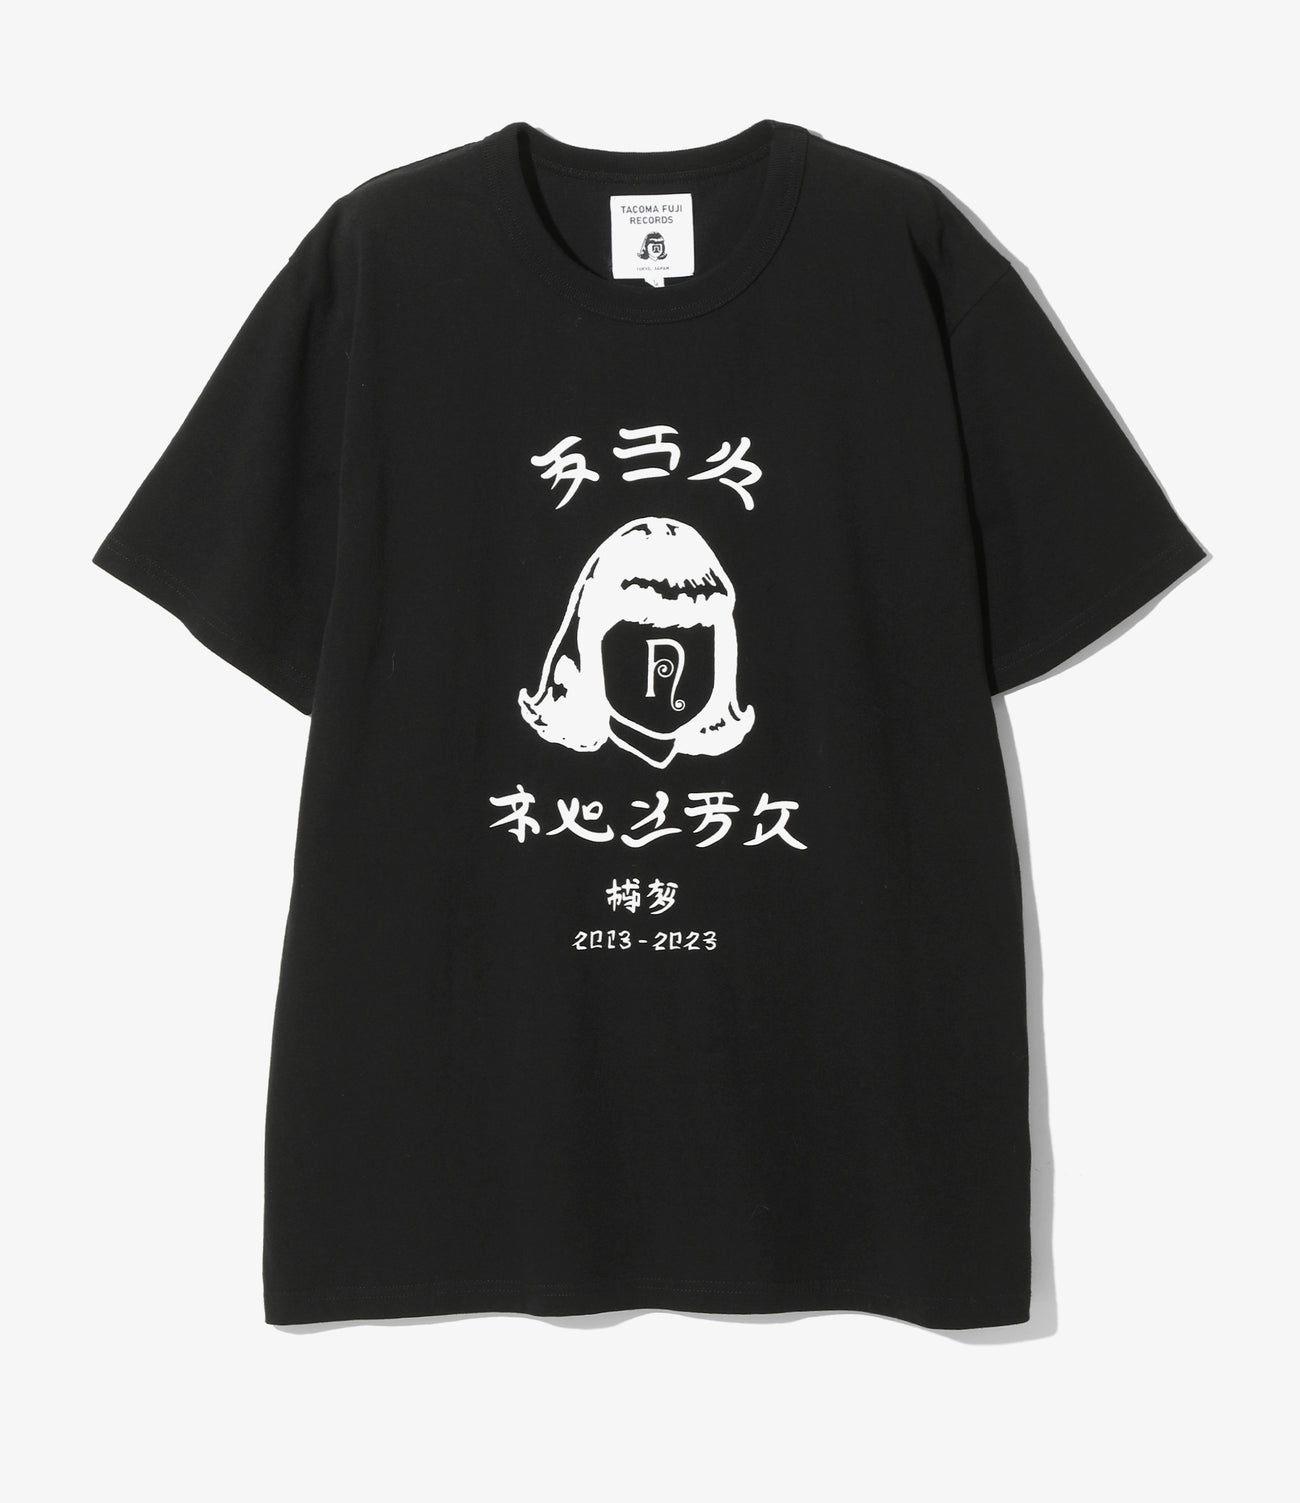 NEPENTHES TACOMA FUJI RECORDS 博多 Tシャツ - Tシャツ/カットソー